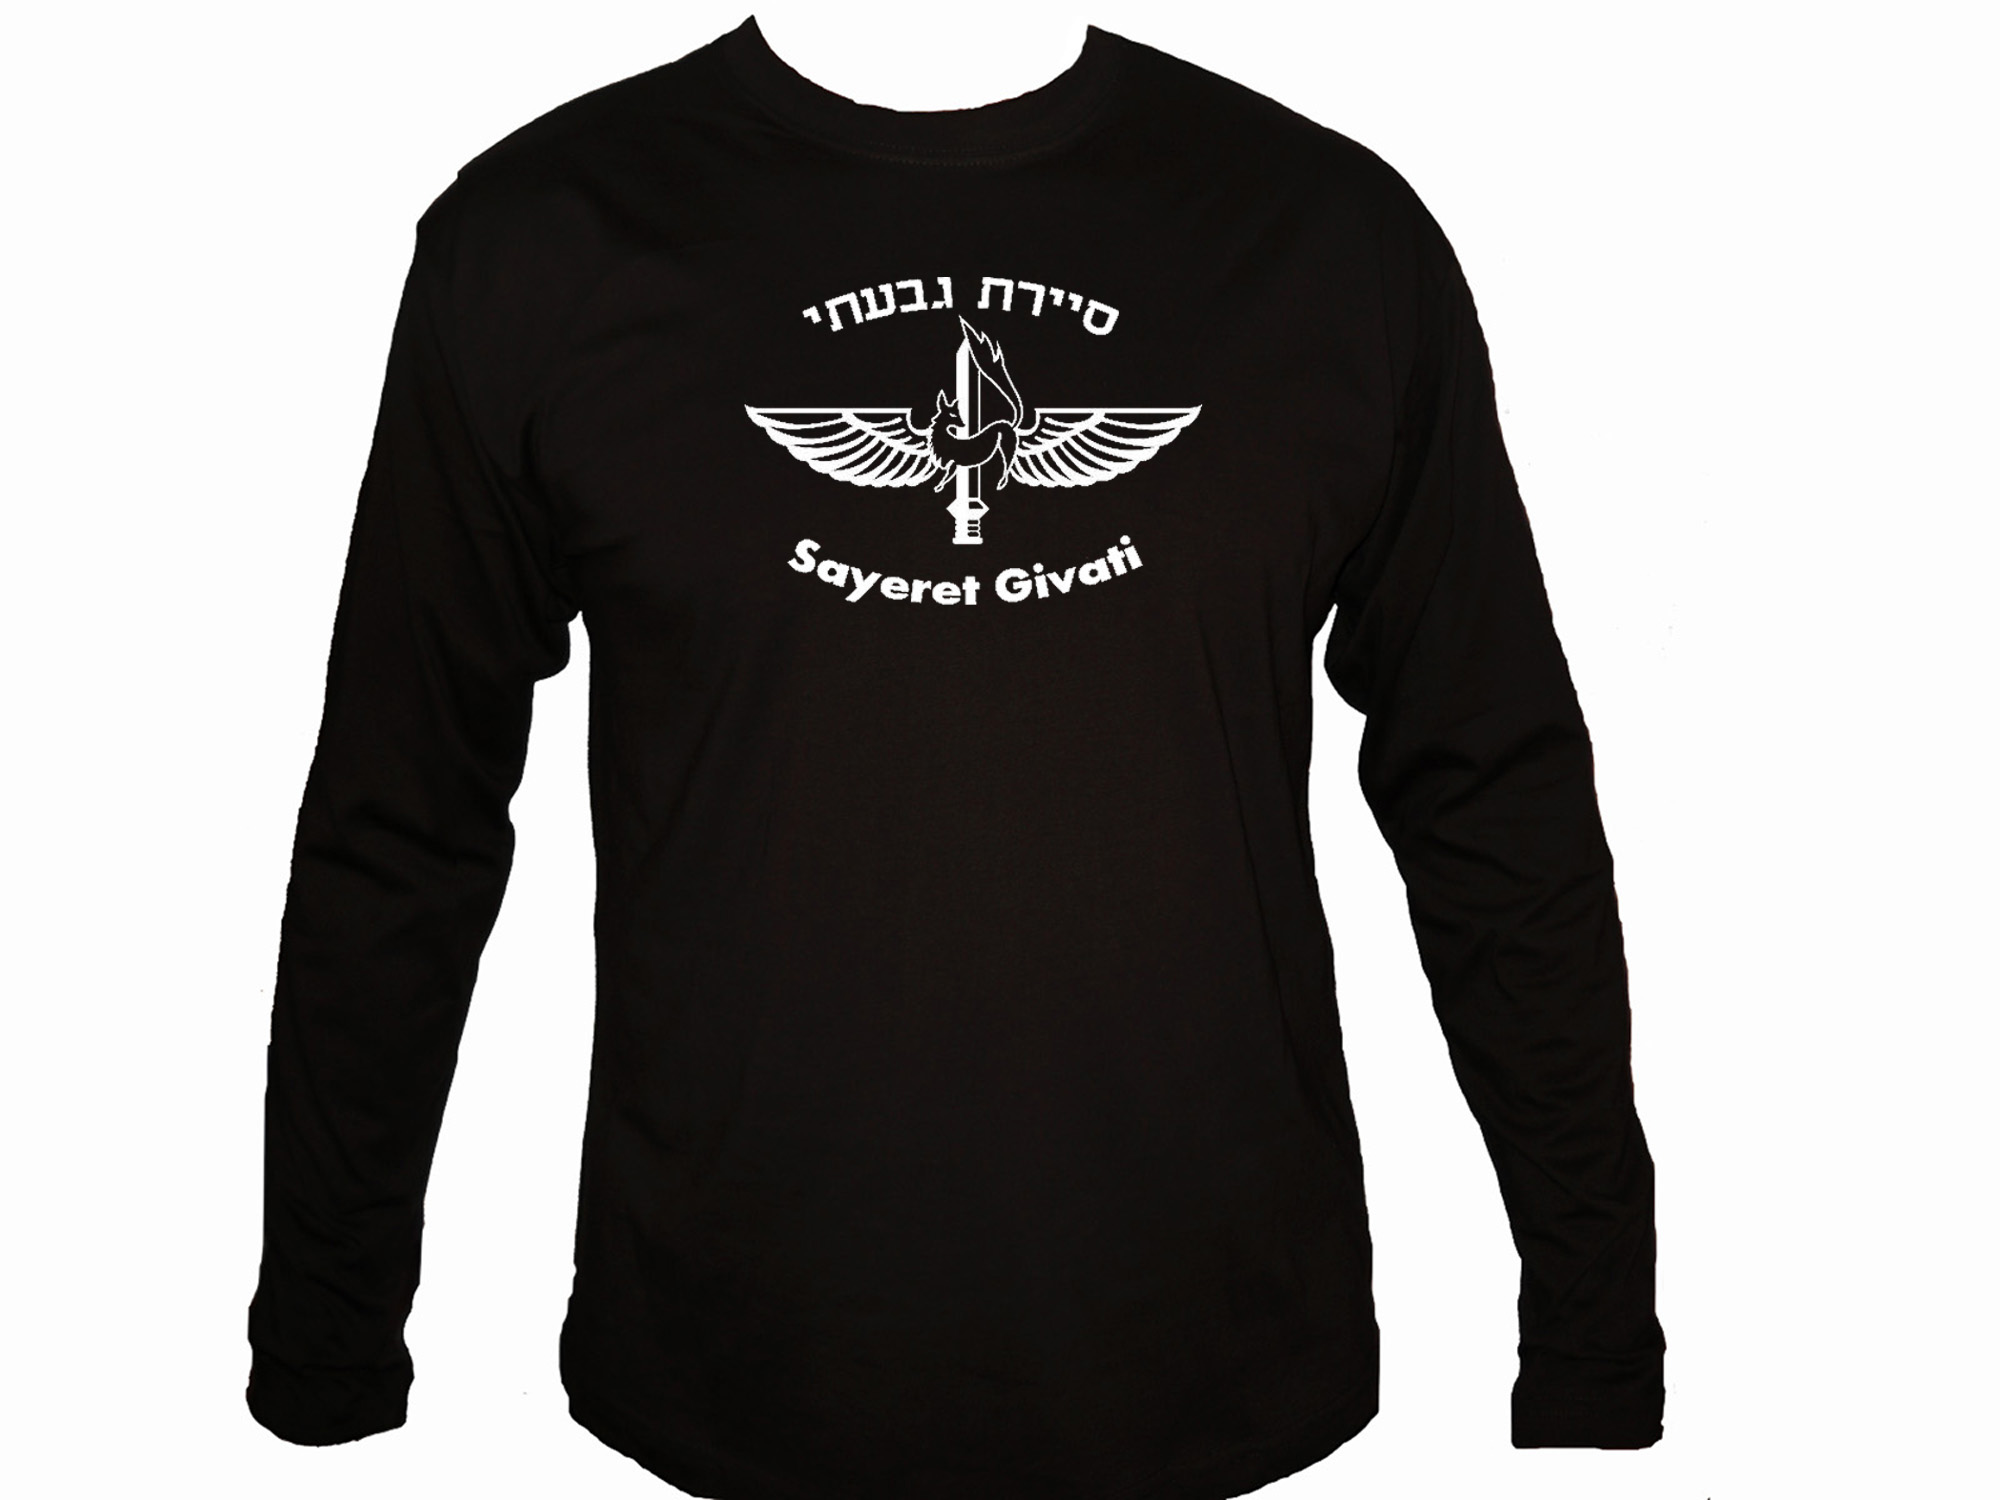 Sayeret Givati Brigade IDF Israel Army special forces sleeved t-shirt